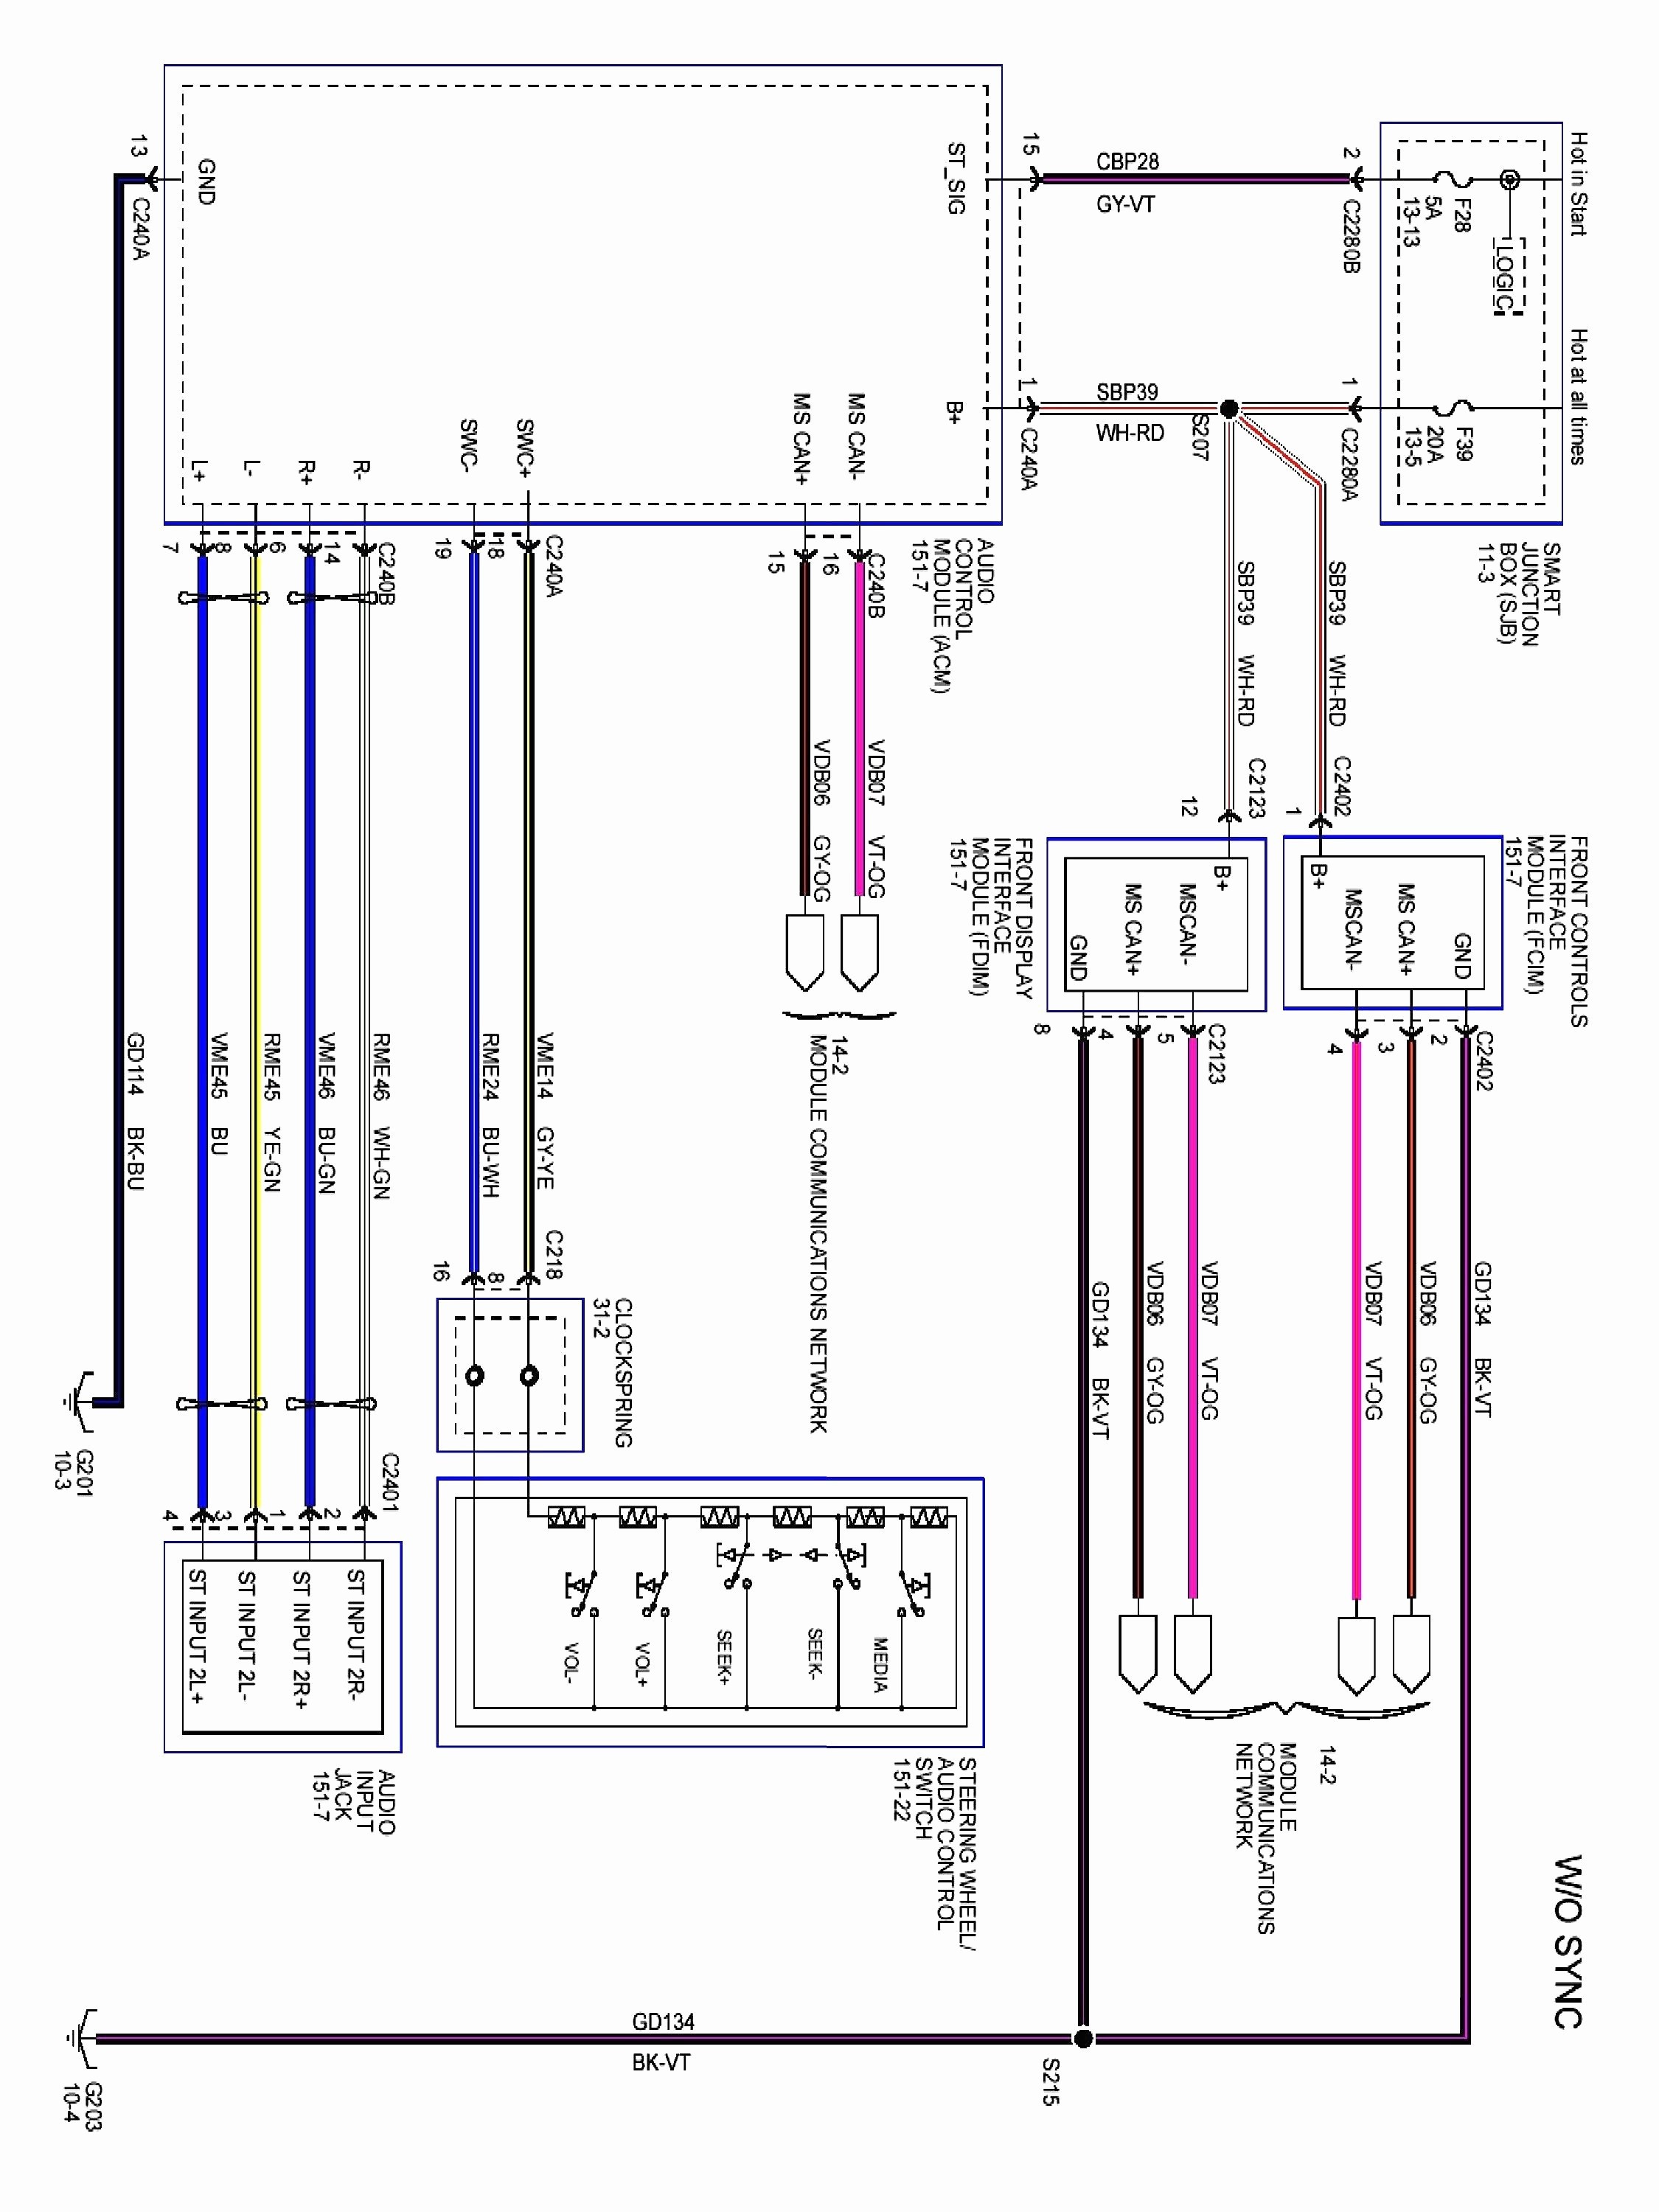 Car Stereo Wiring Diagram Wiring Diagram for Amplifier Car Stereo Best Amplifier Wiring Diagram Inspirational